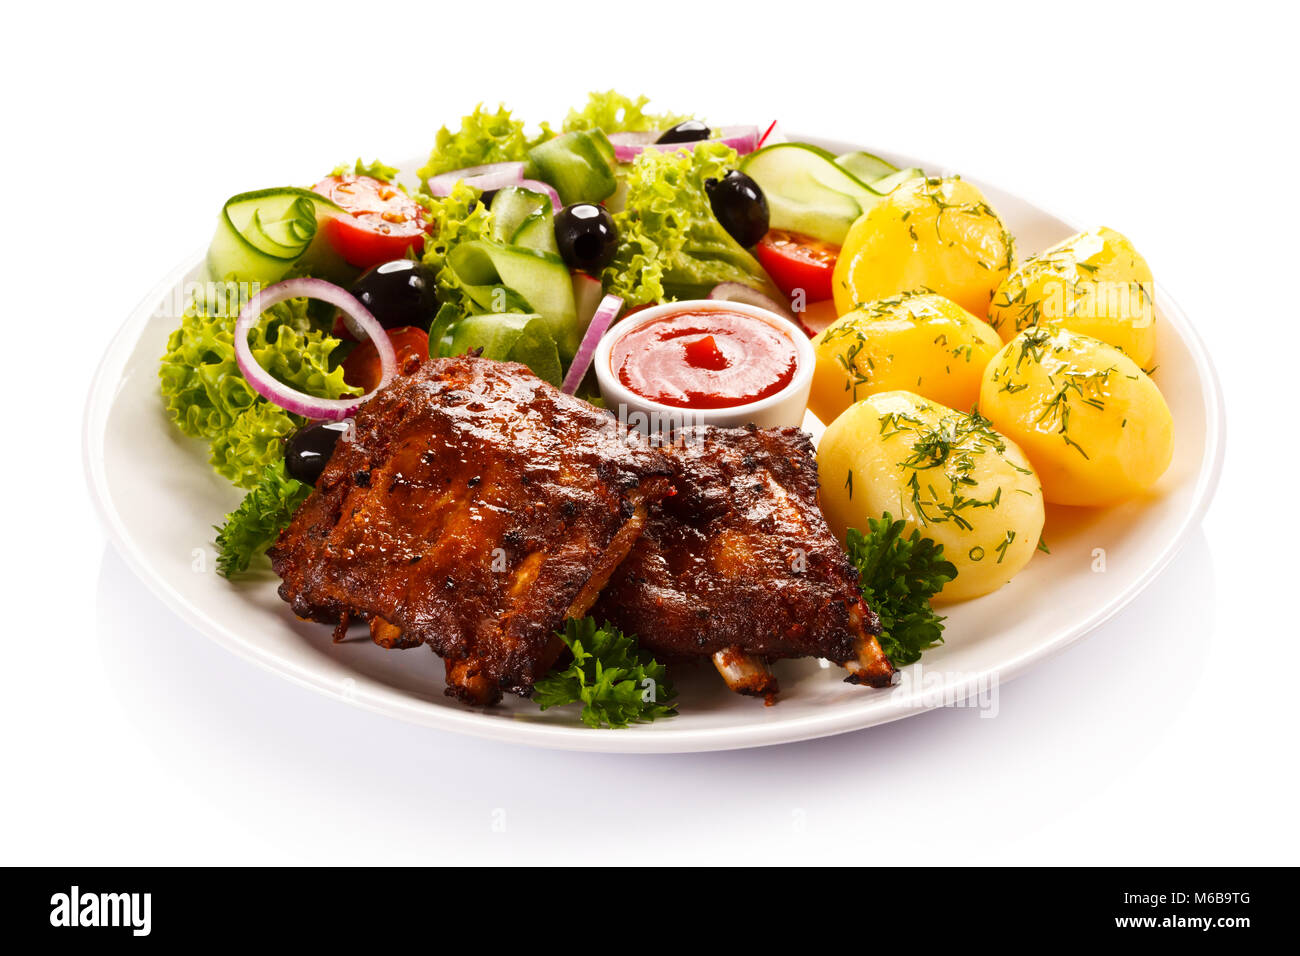 Grilled ribs, French fries and vegetables on white background Stock Photo